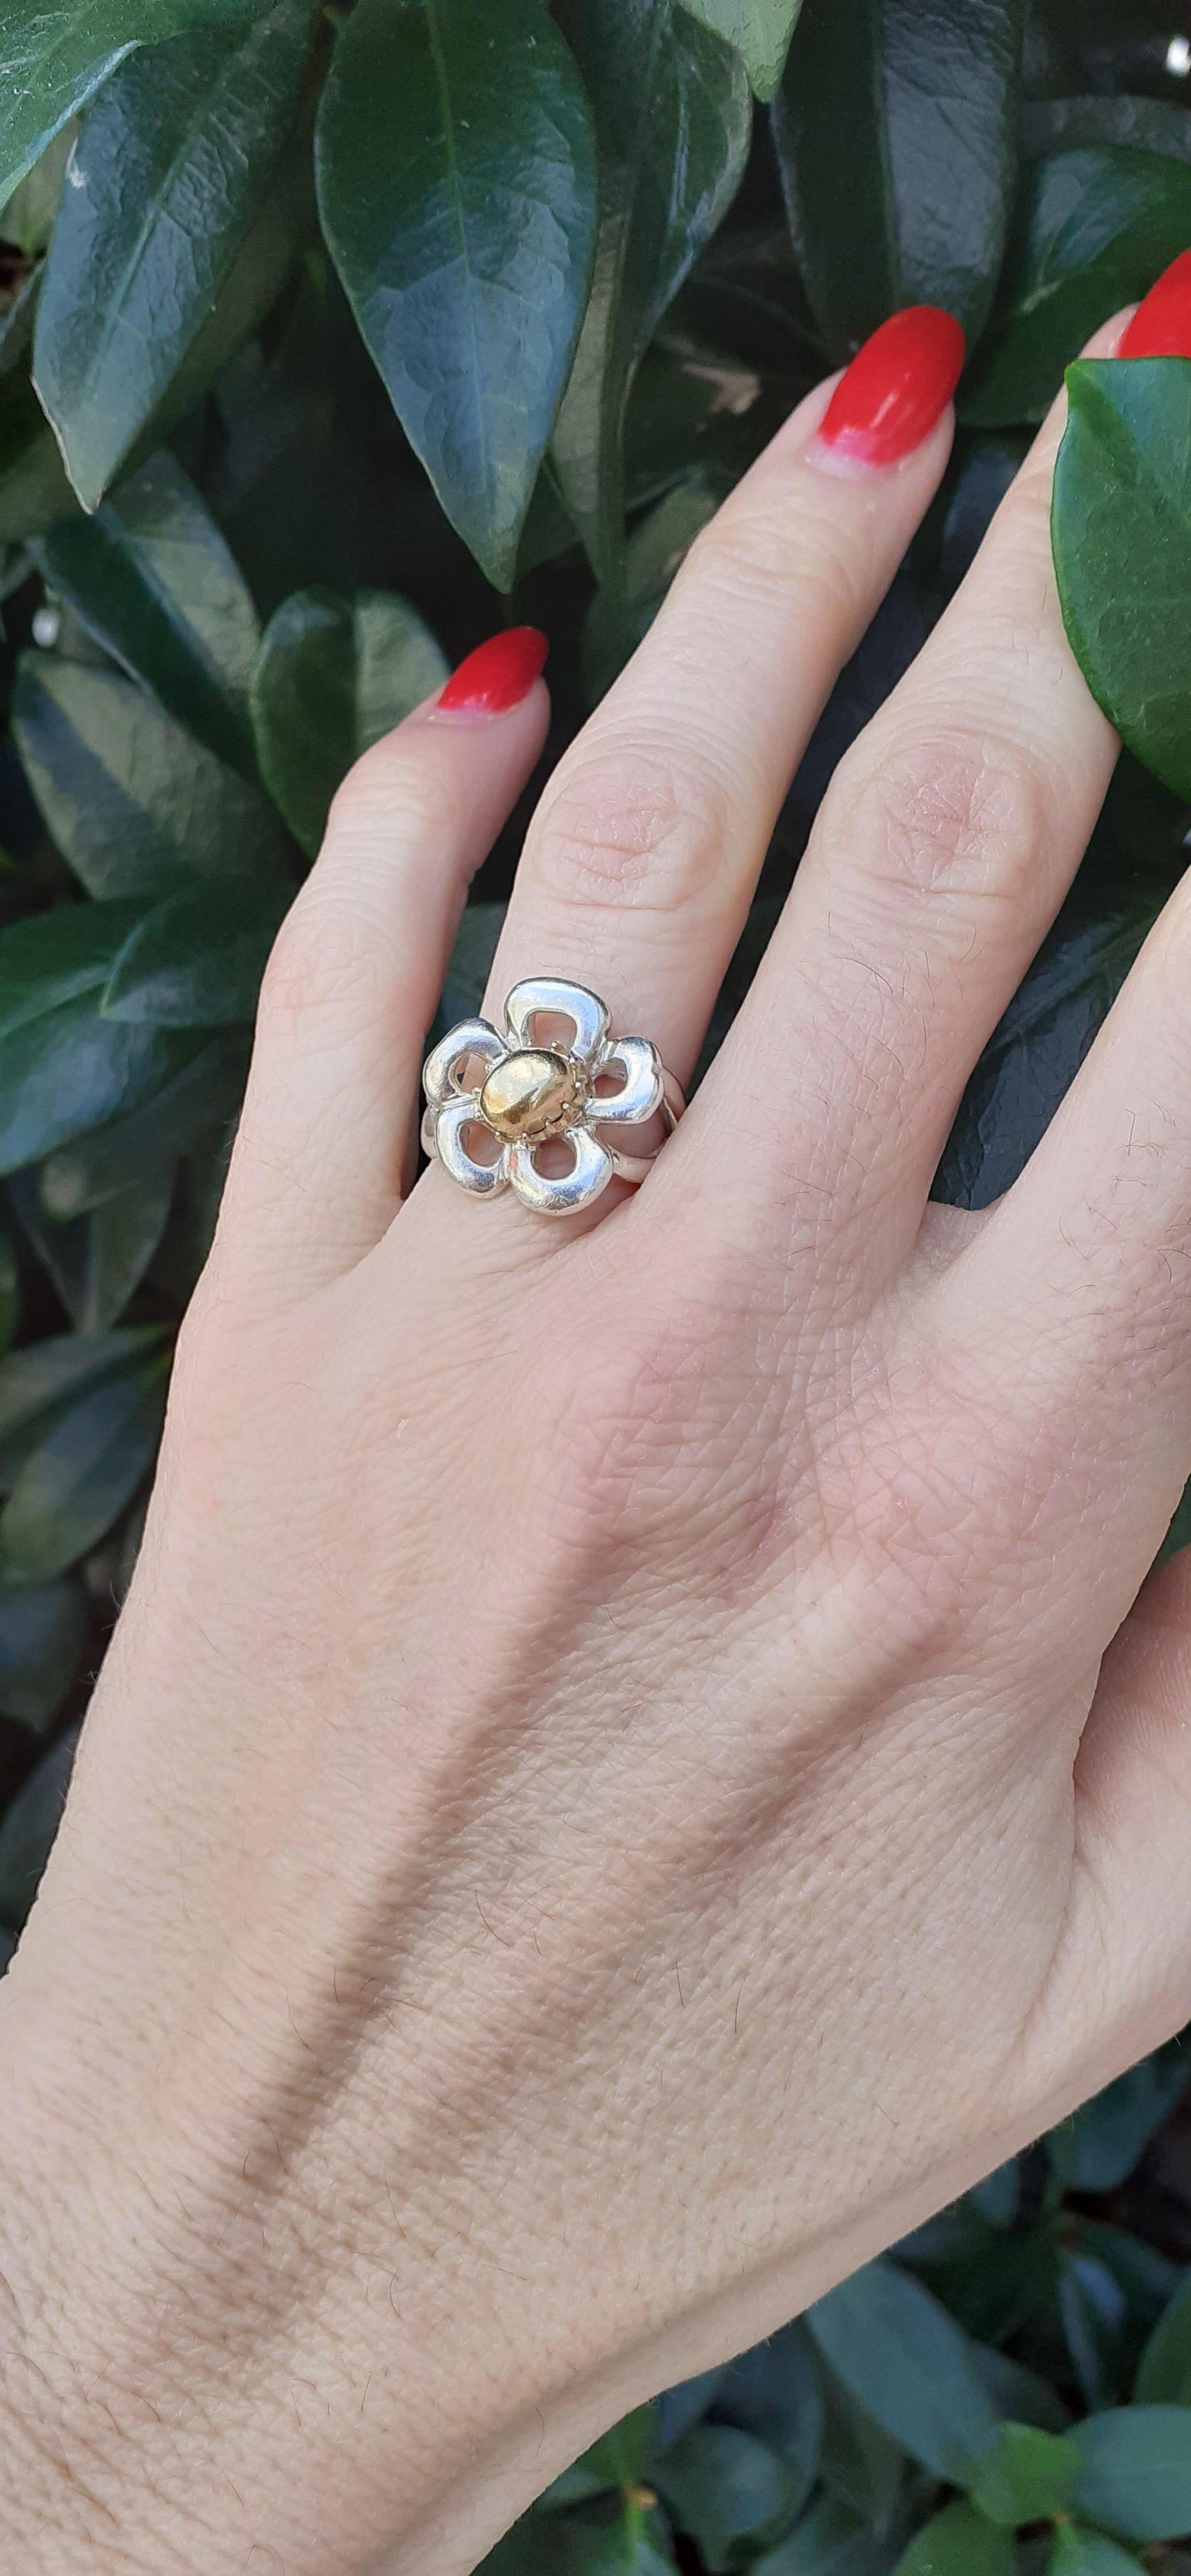 Hermès Flower Shaped Ring Silver and Gold Size 7 / 53 Resizable For Sale 3